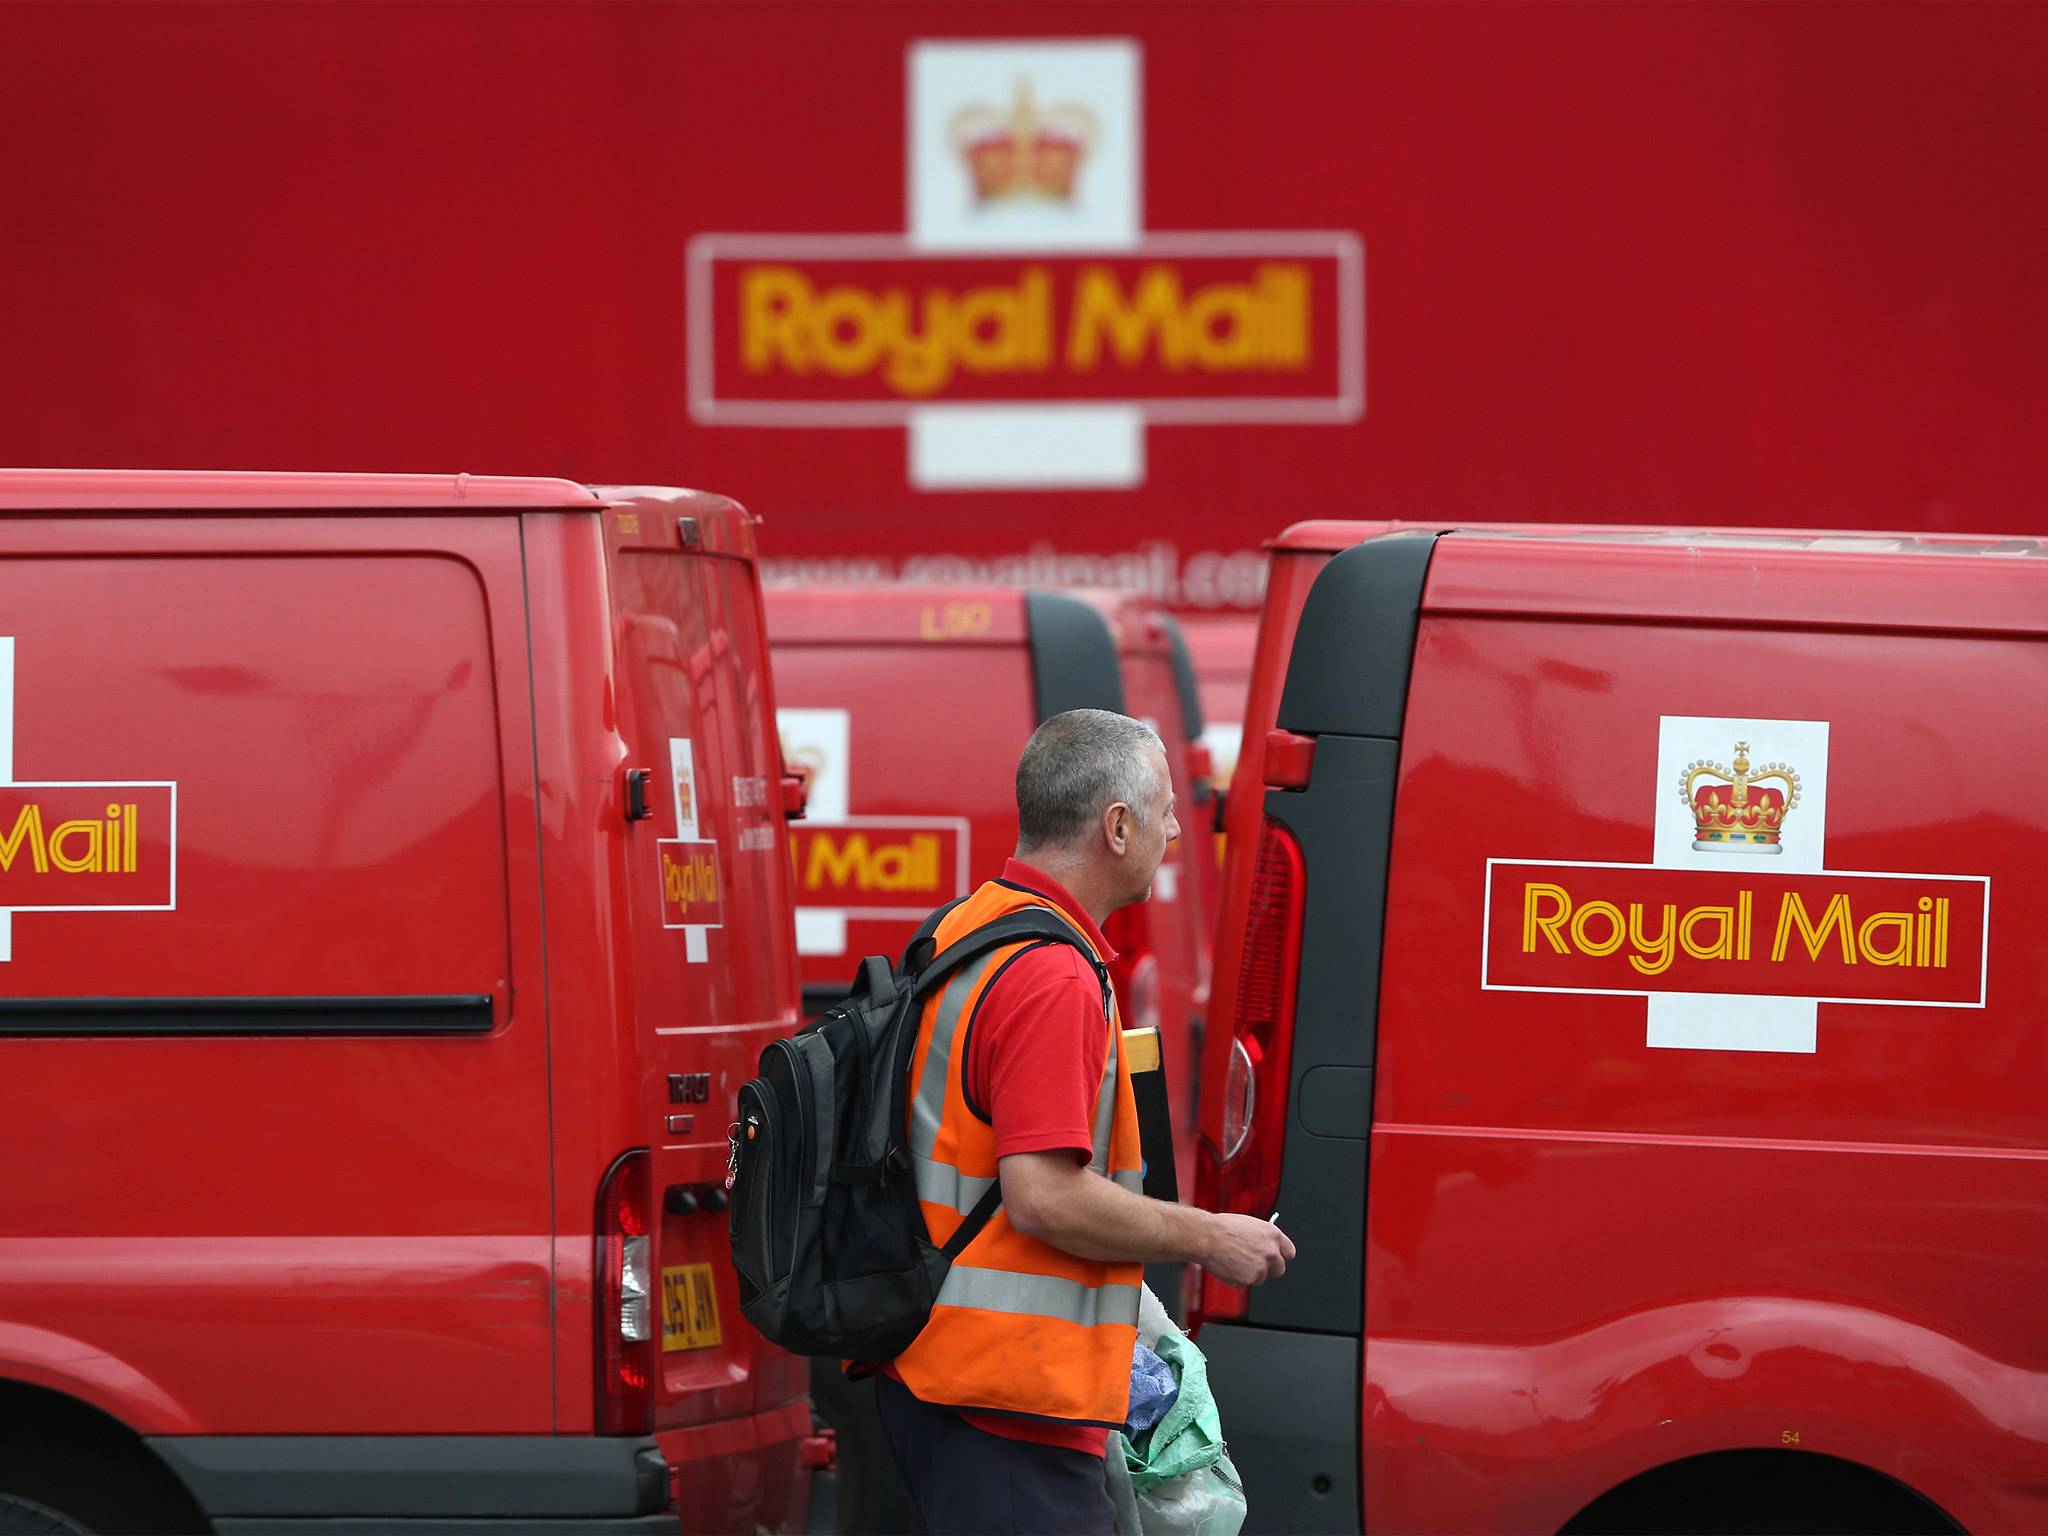 Goldman Sachs priced the Royal Mail at £3.30-a-share when it floated last October